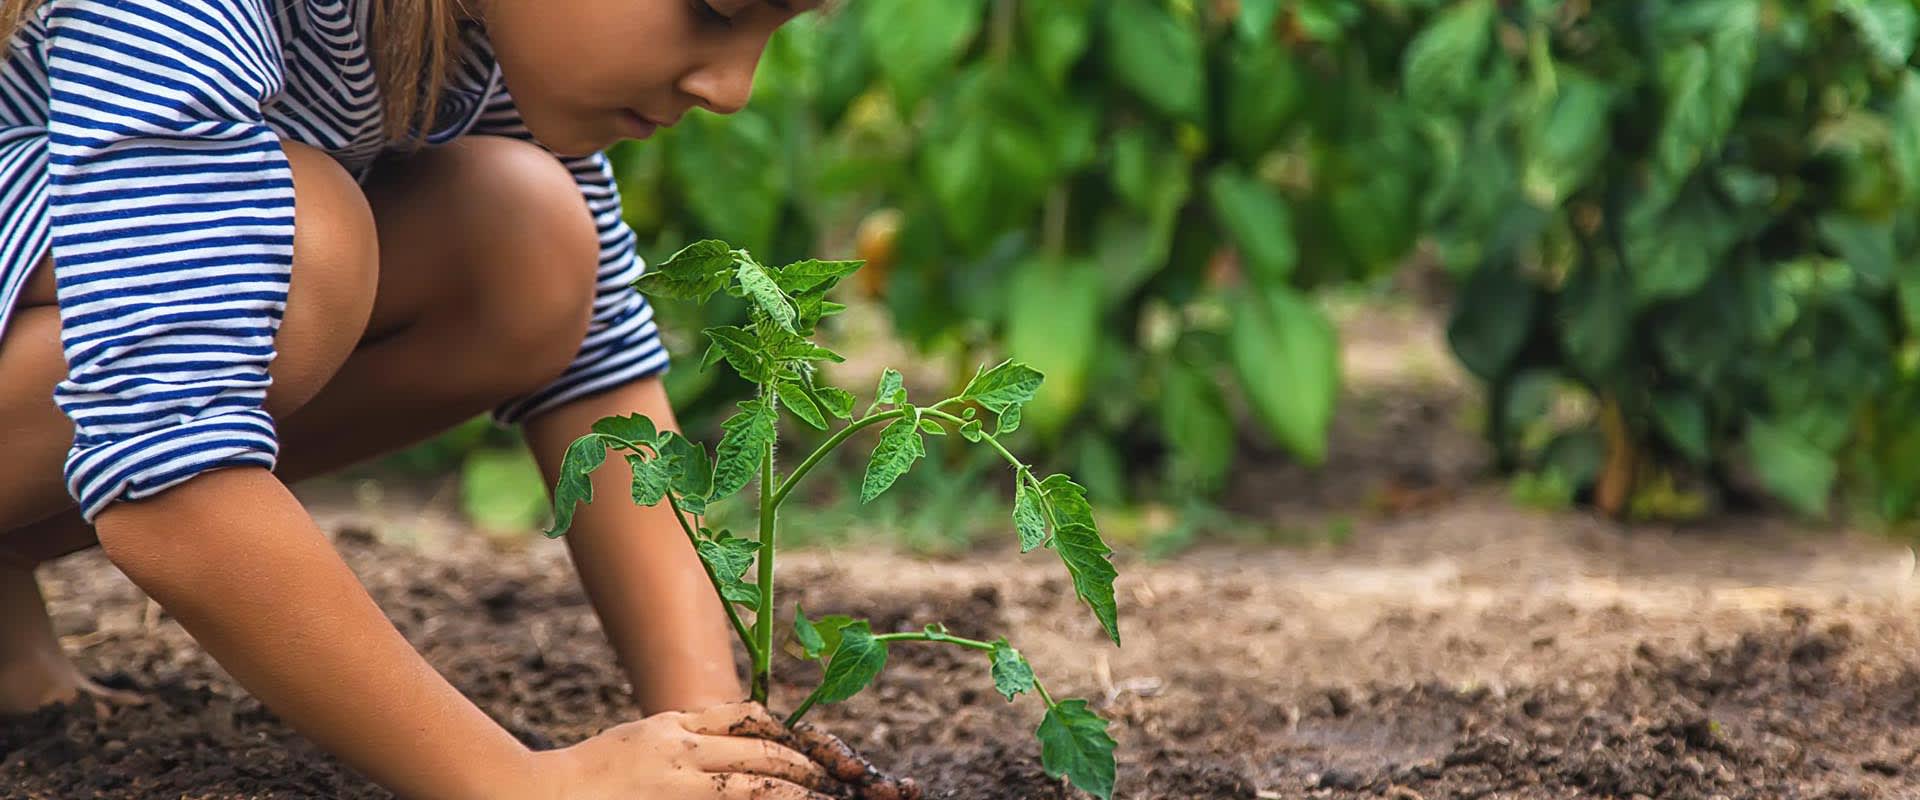 Image of a girl laying a plant into the soil.